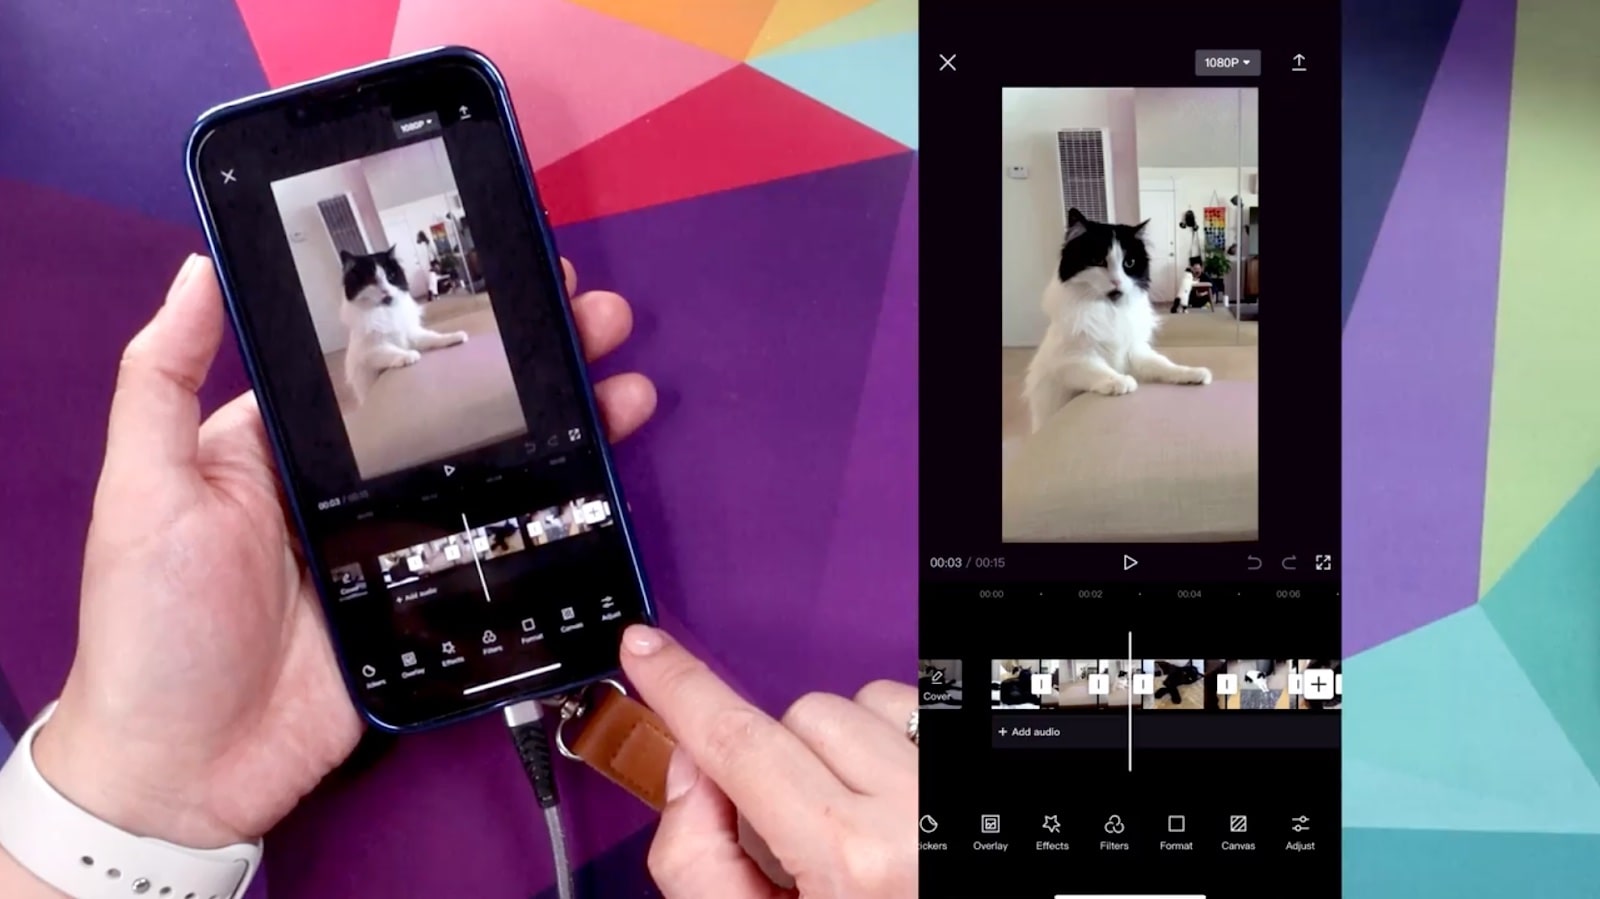 A black and white cat is the star of this CapCut tutorial. With a screenshot on the right side and a hand holding a phone with the CapCut screen on it, this video editing software shows features like filters and overlays.